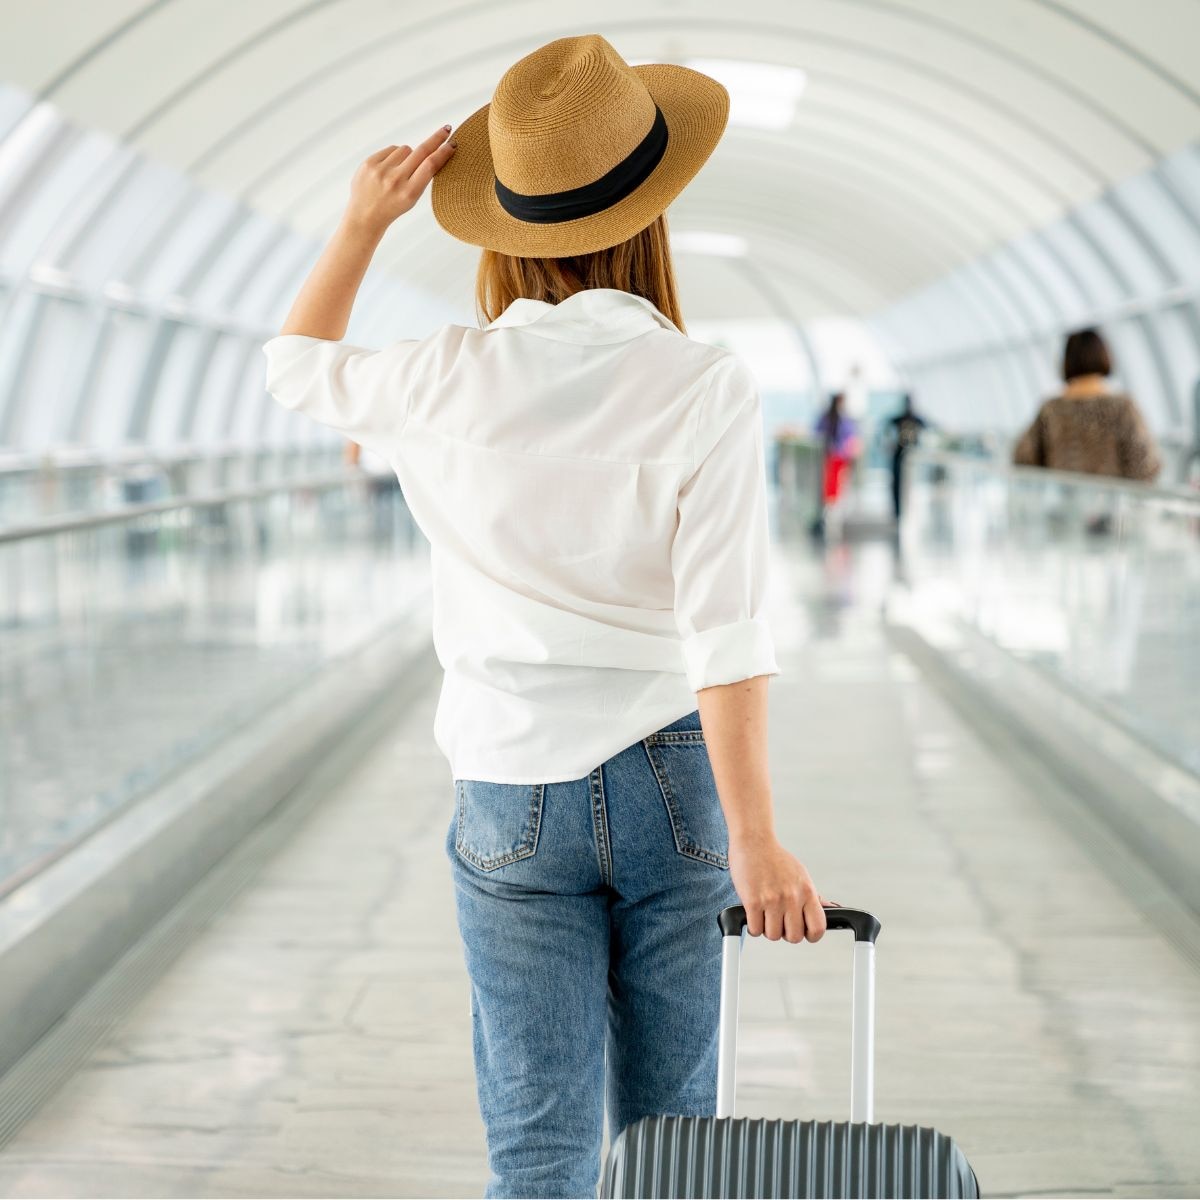 <div>27 Things to Pack if You're Traveling Solo This Year</div>